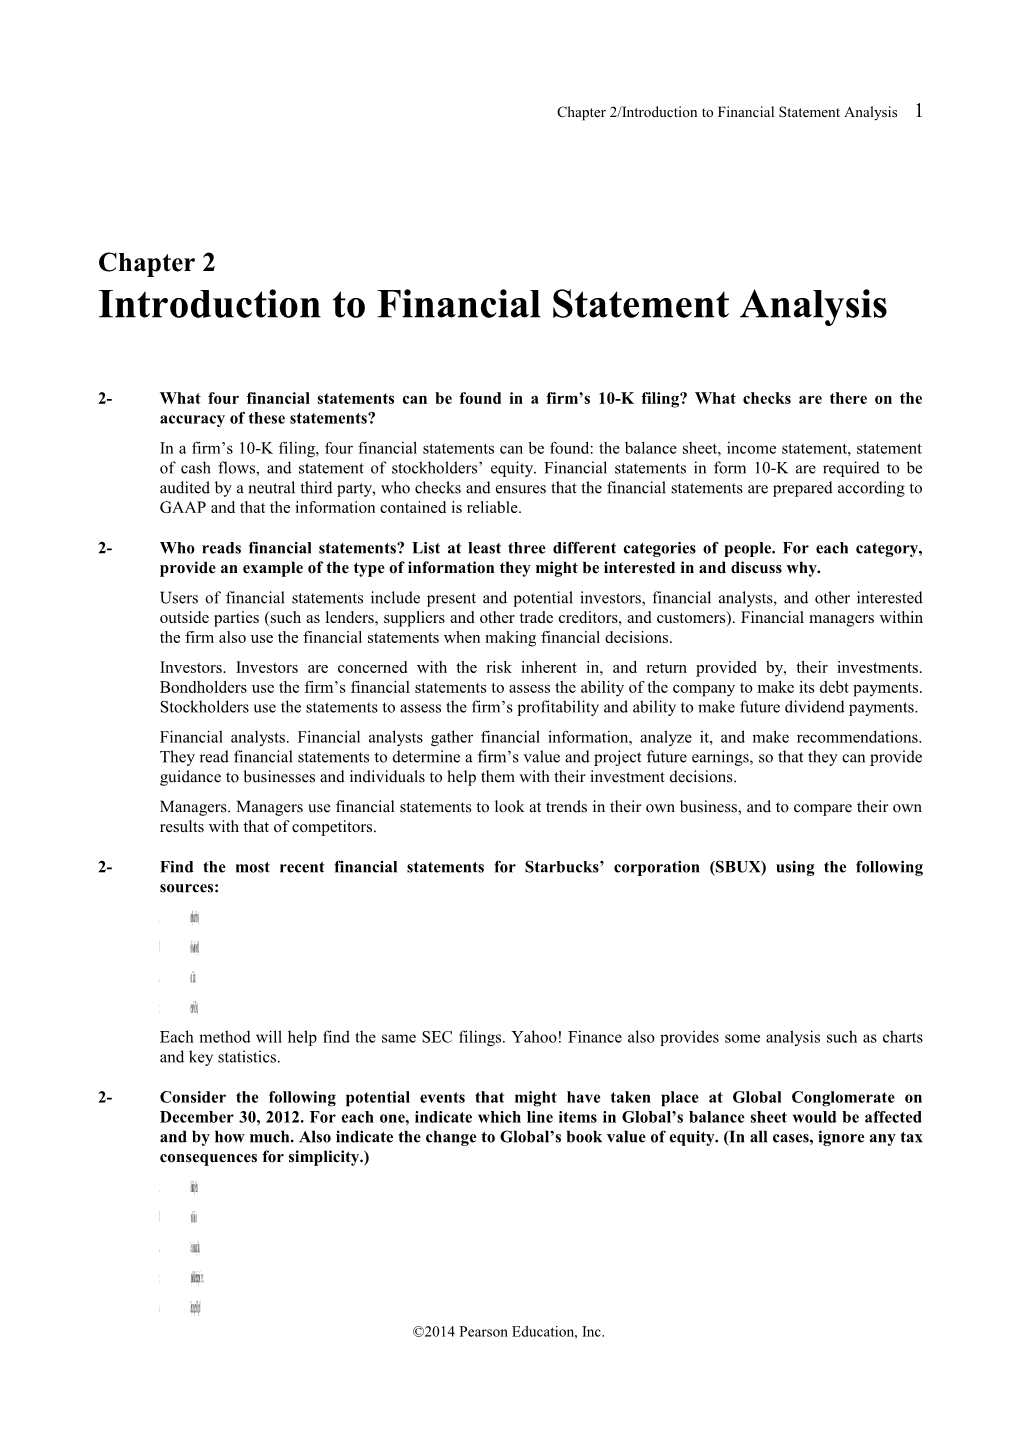 Introduction to Financial Statement Analysis